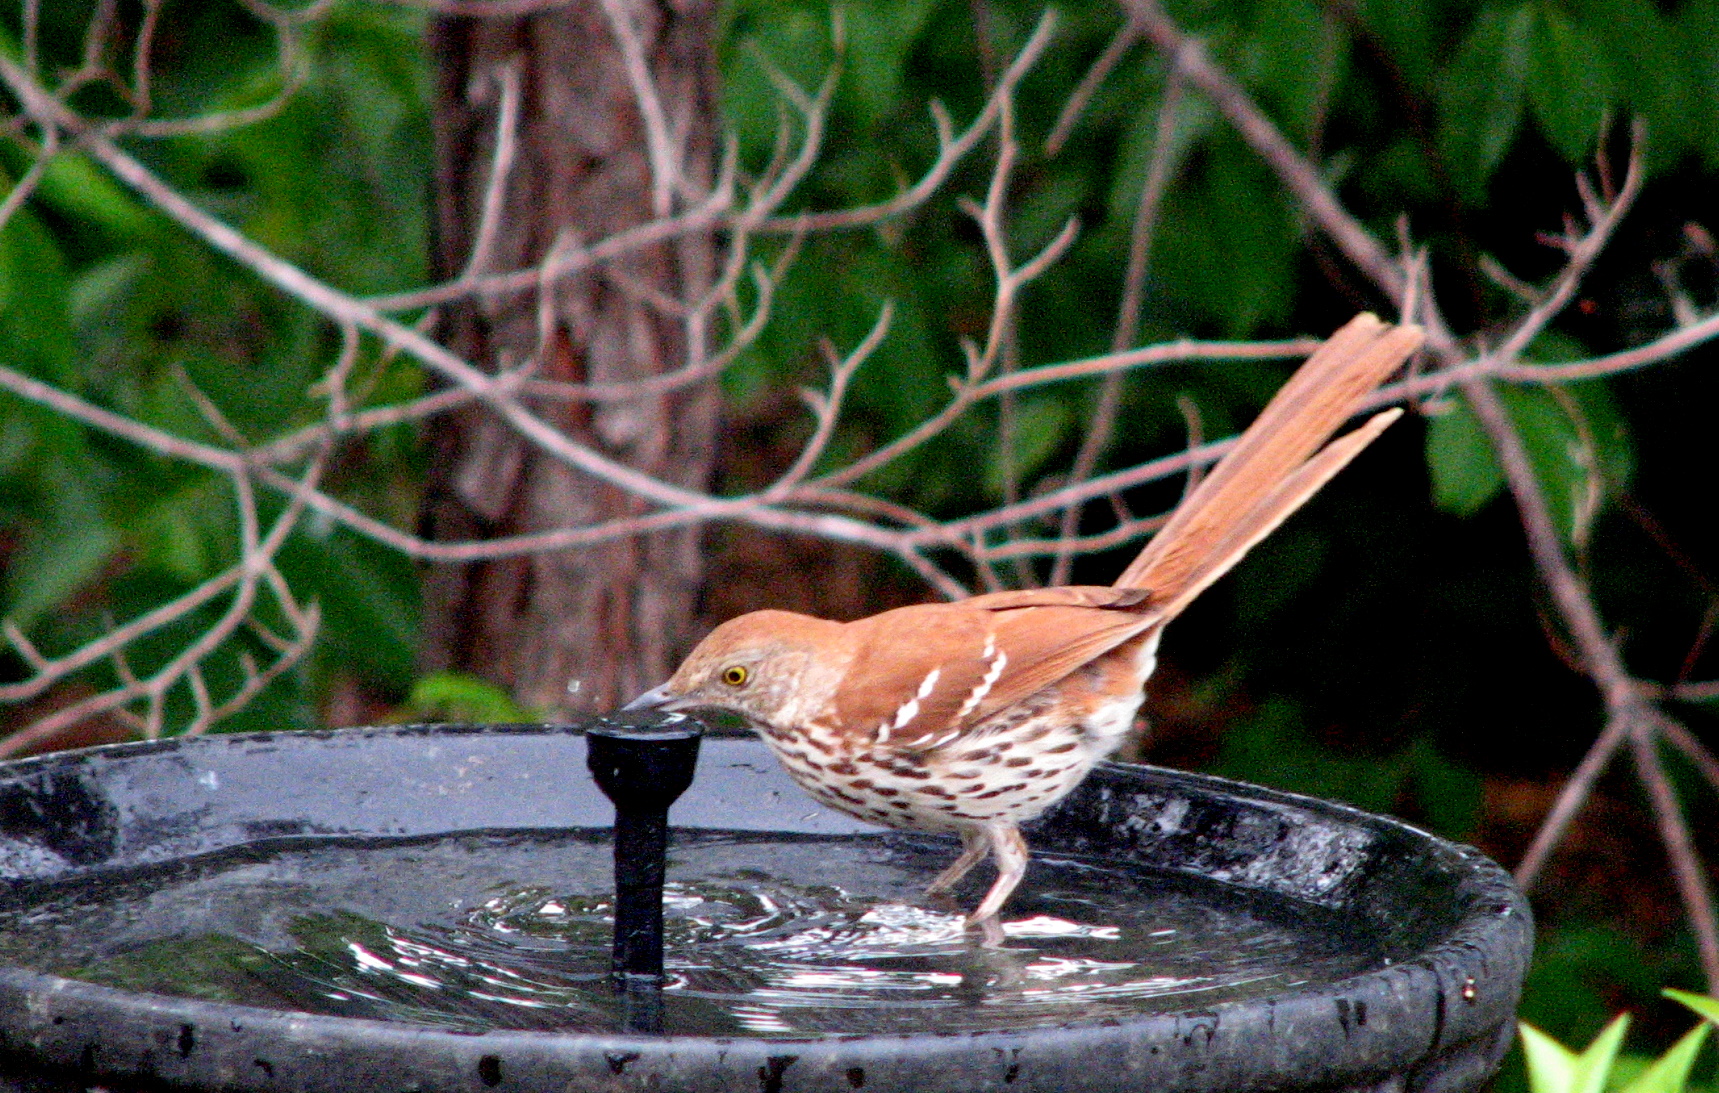 Brown Thrasher. Brown songbird with a white breast striped with thin brown lines, gets a drink in a birdbath.